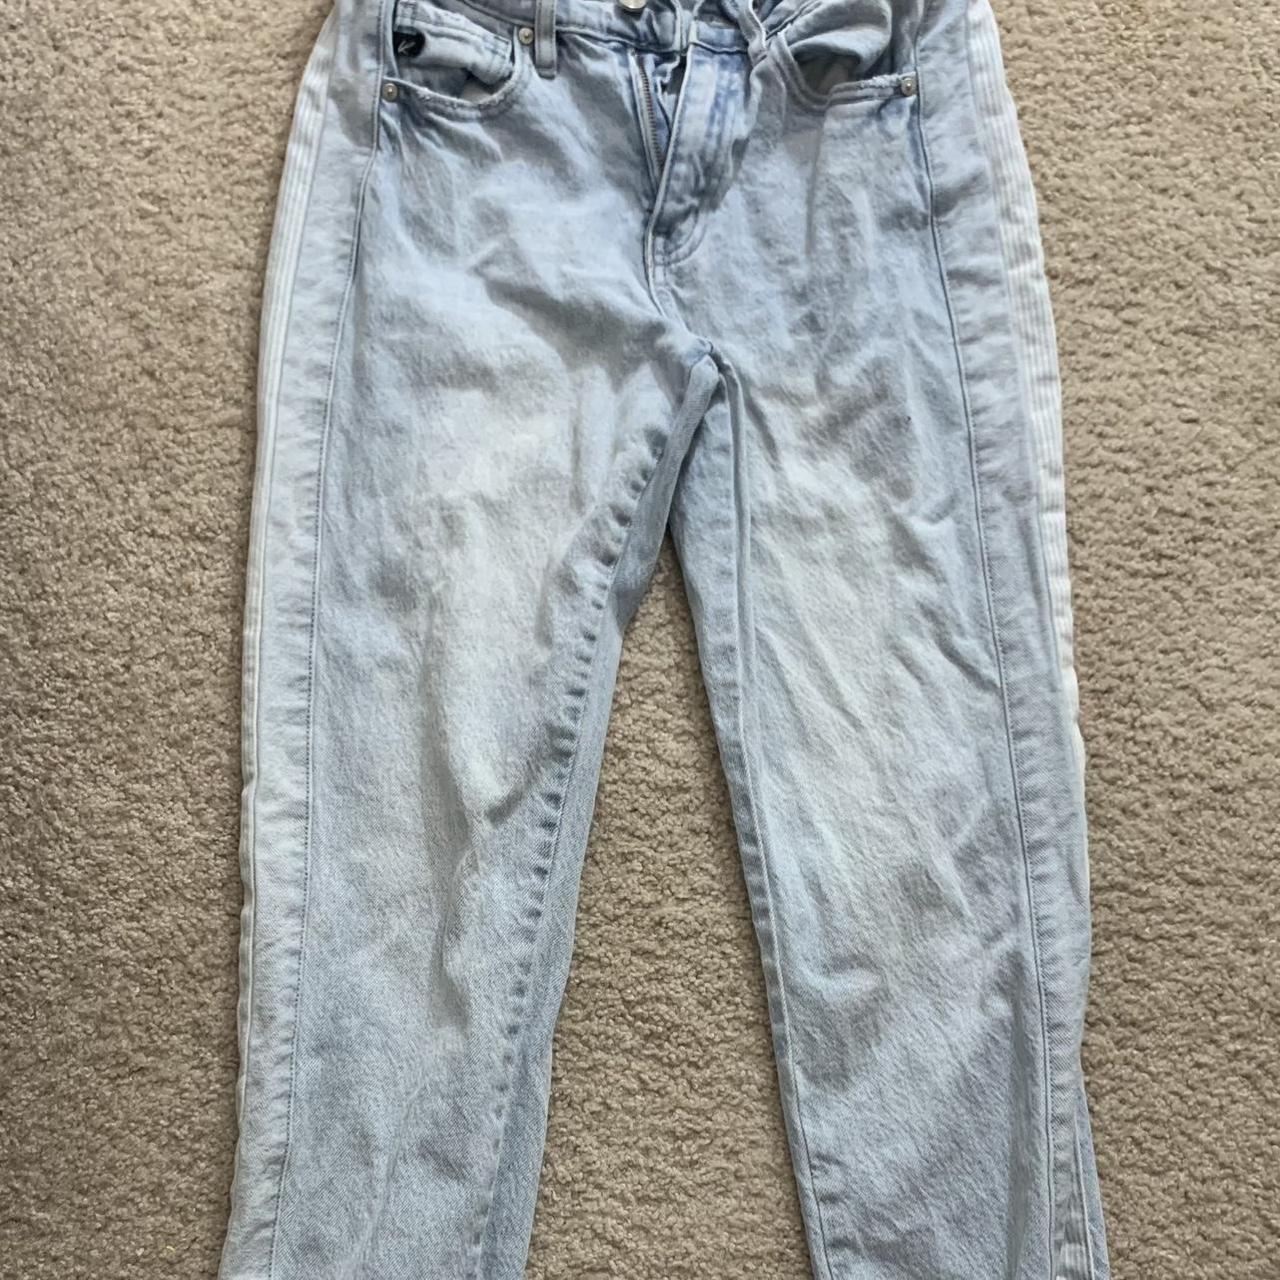 Only worn once - Depop